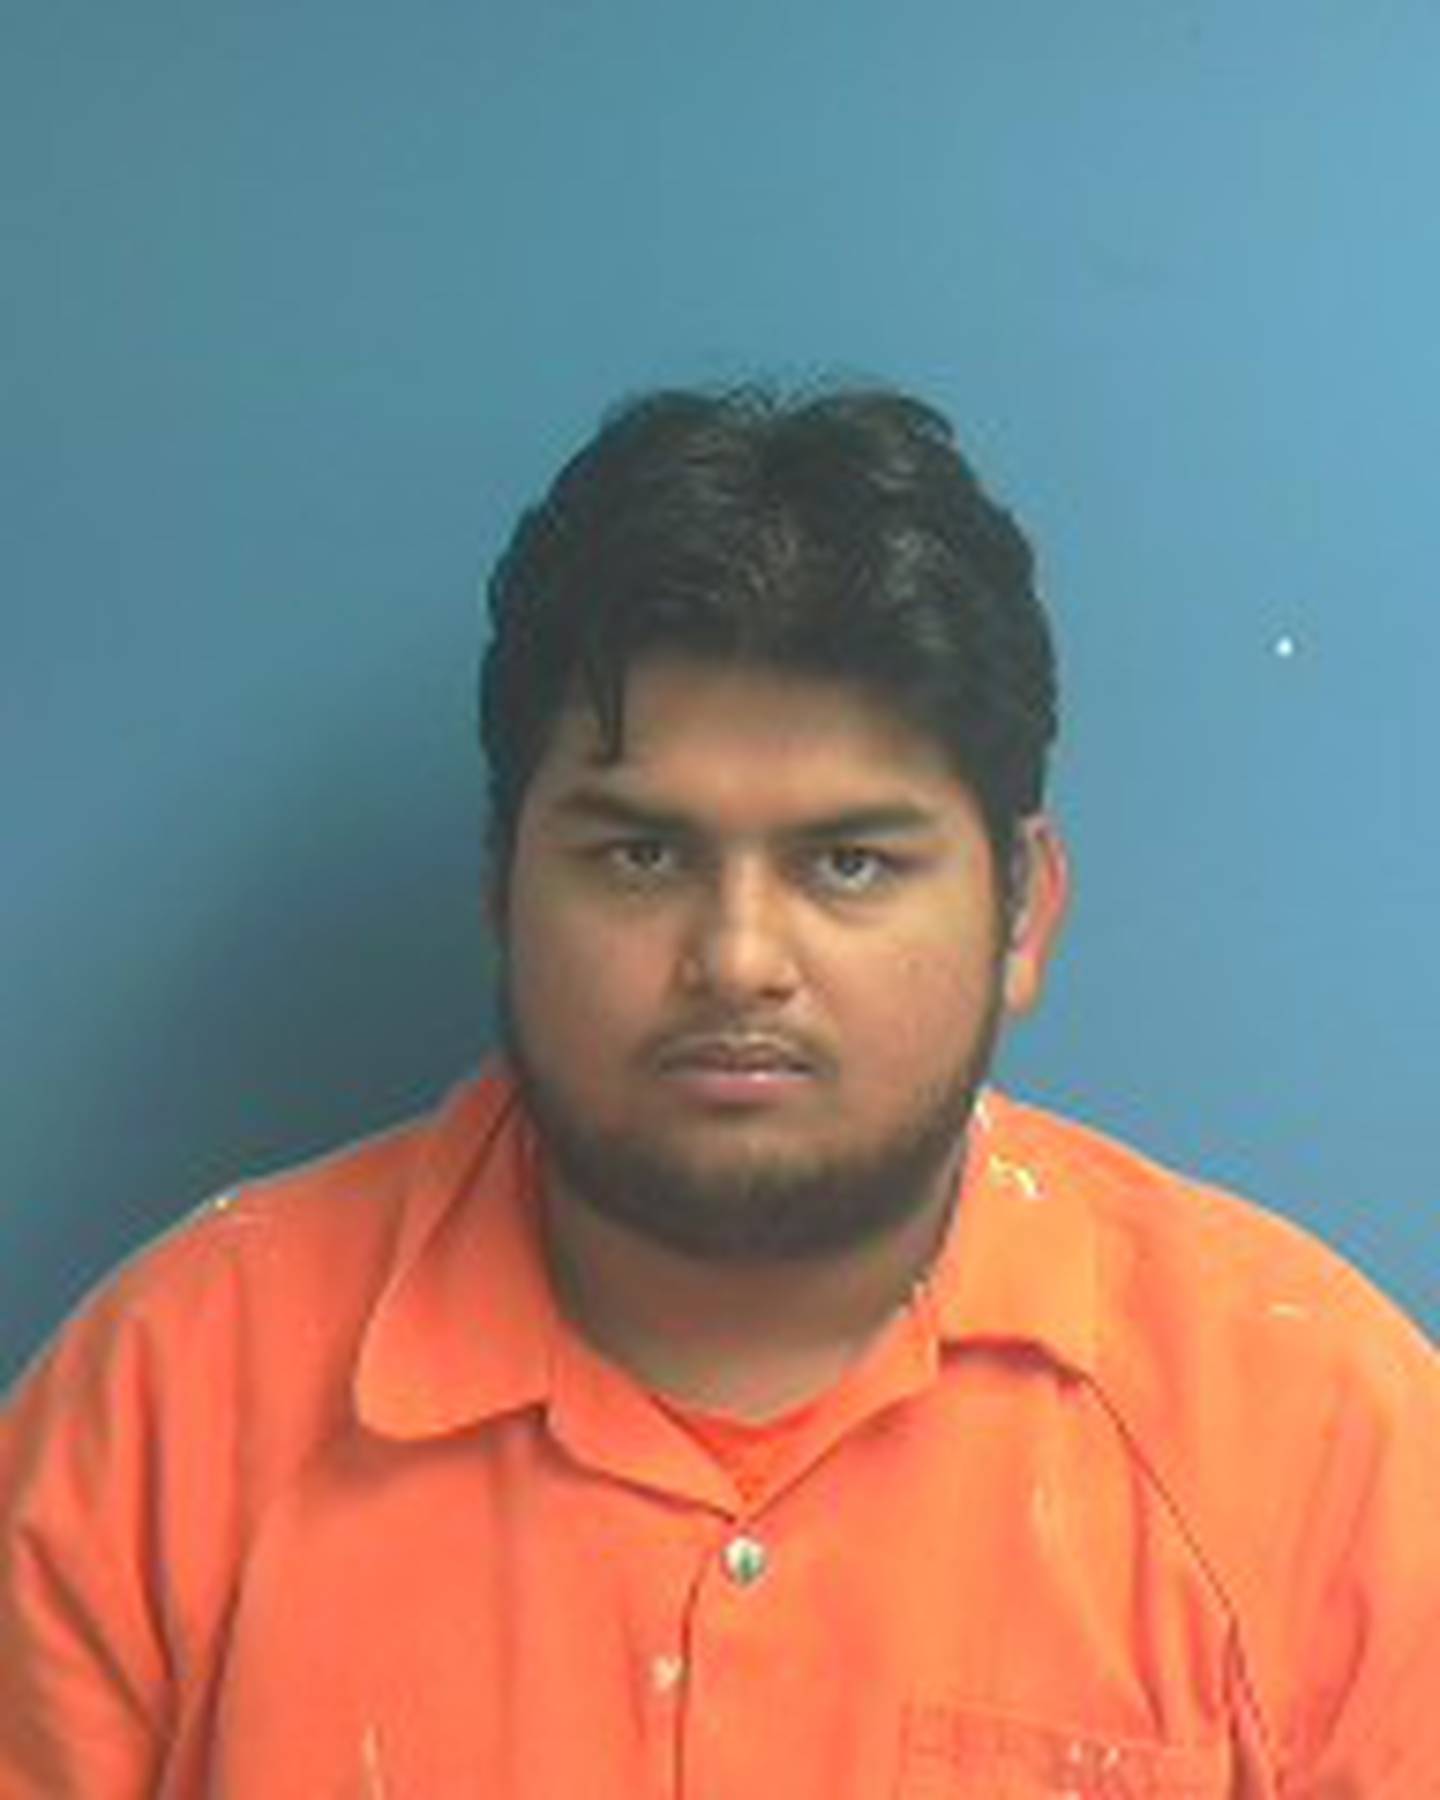 Jay Rami, 19, was arrested for selling drugs to minors out of a vape shop in Union County.